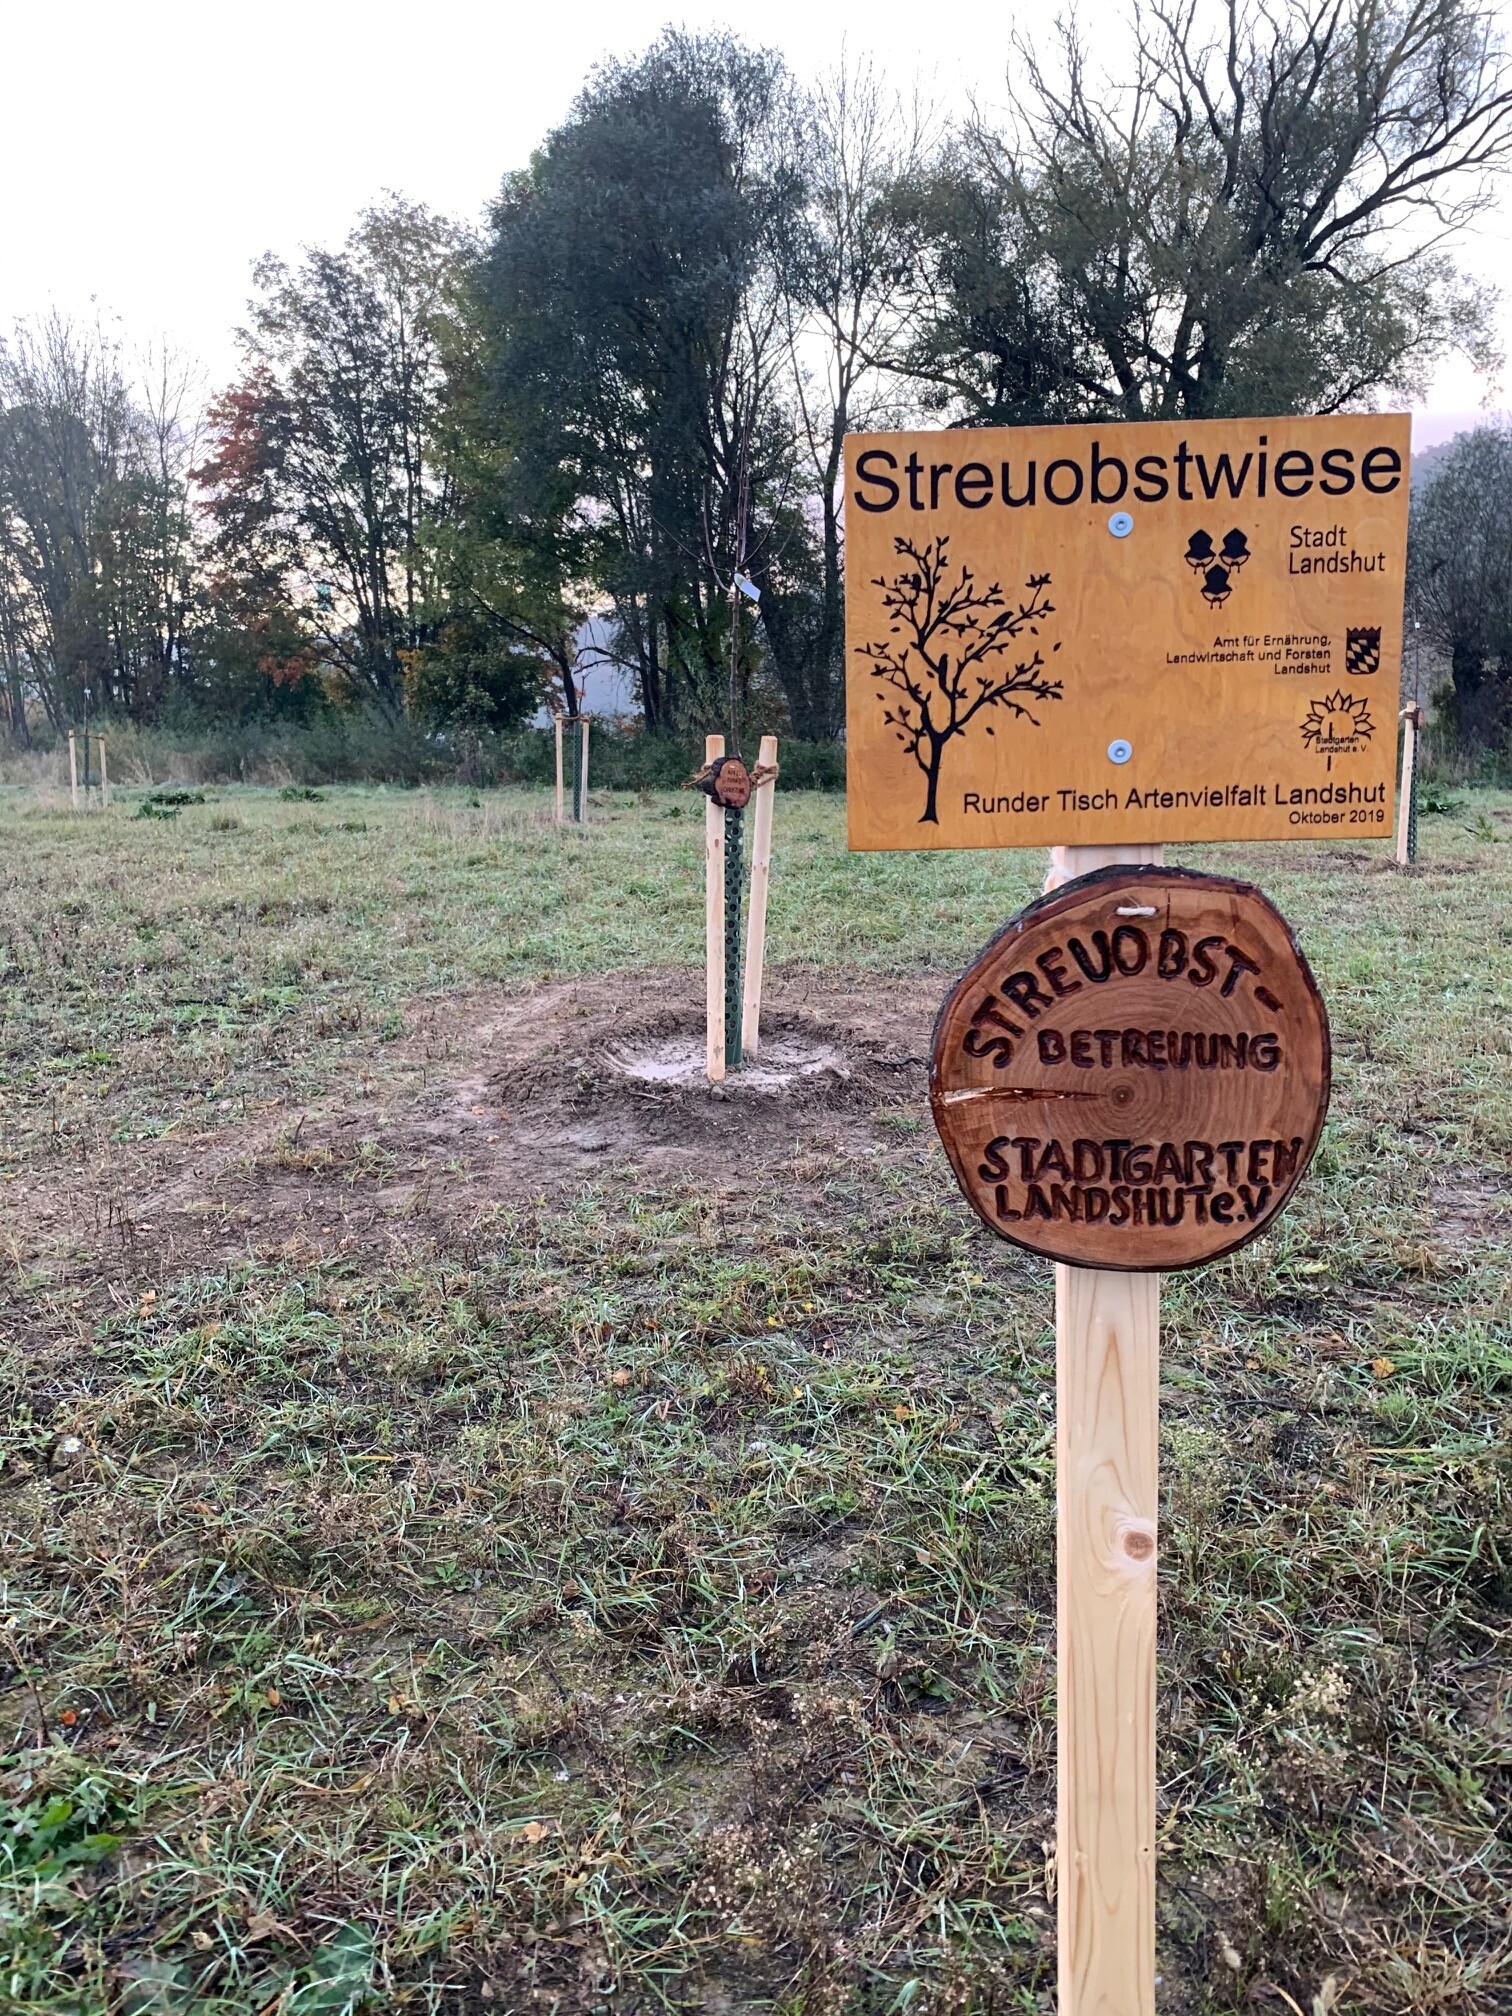 Actionfilm the round table biodiversity Landshut. Planation of a fruit tree garden with several cooperation partners